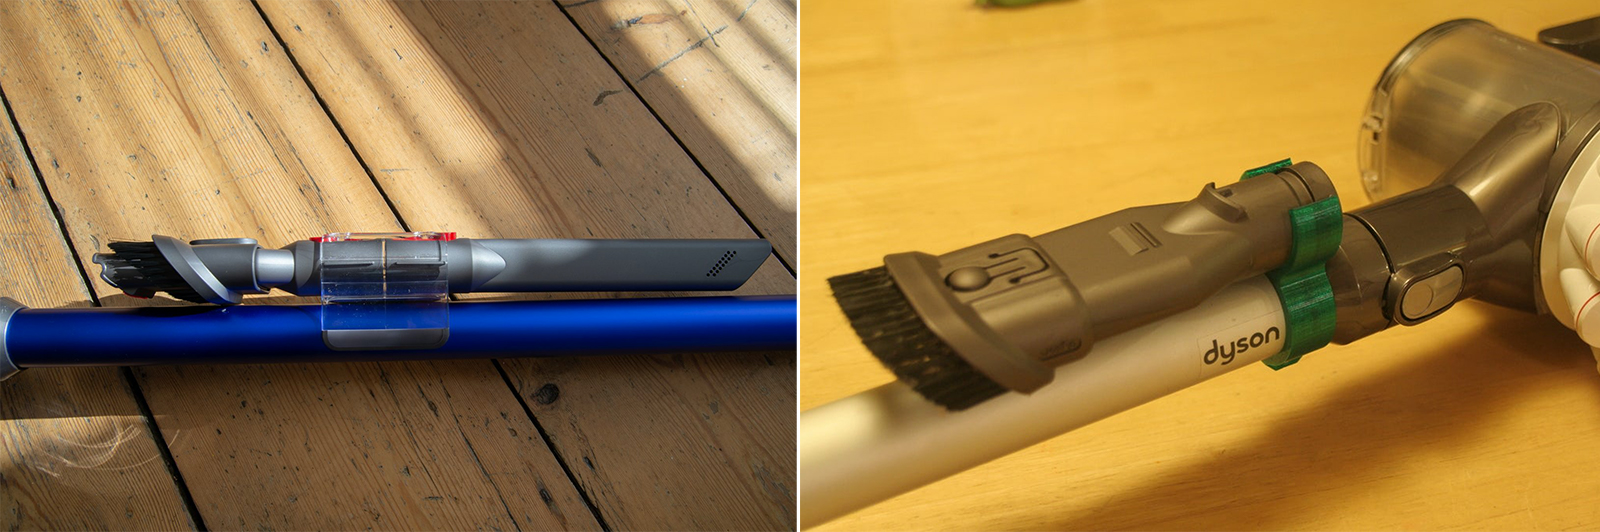 On the left is the native Dyson holder (2019), on the right is the model from Thingiverse (2017).  Photo: trustedreviews.com